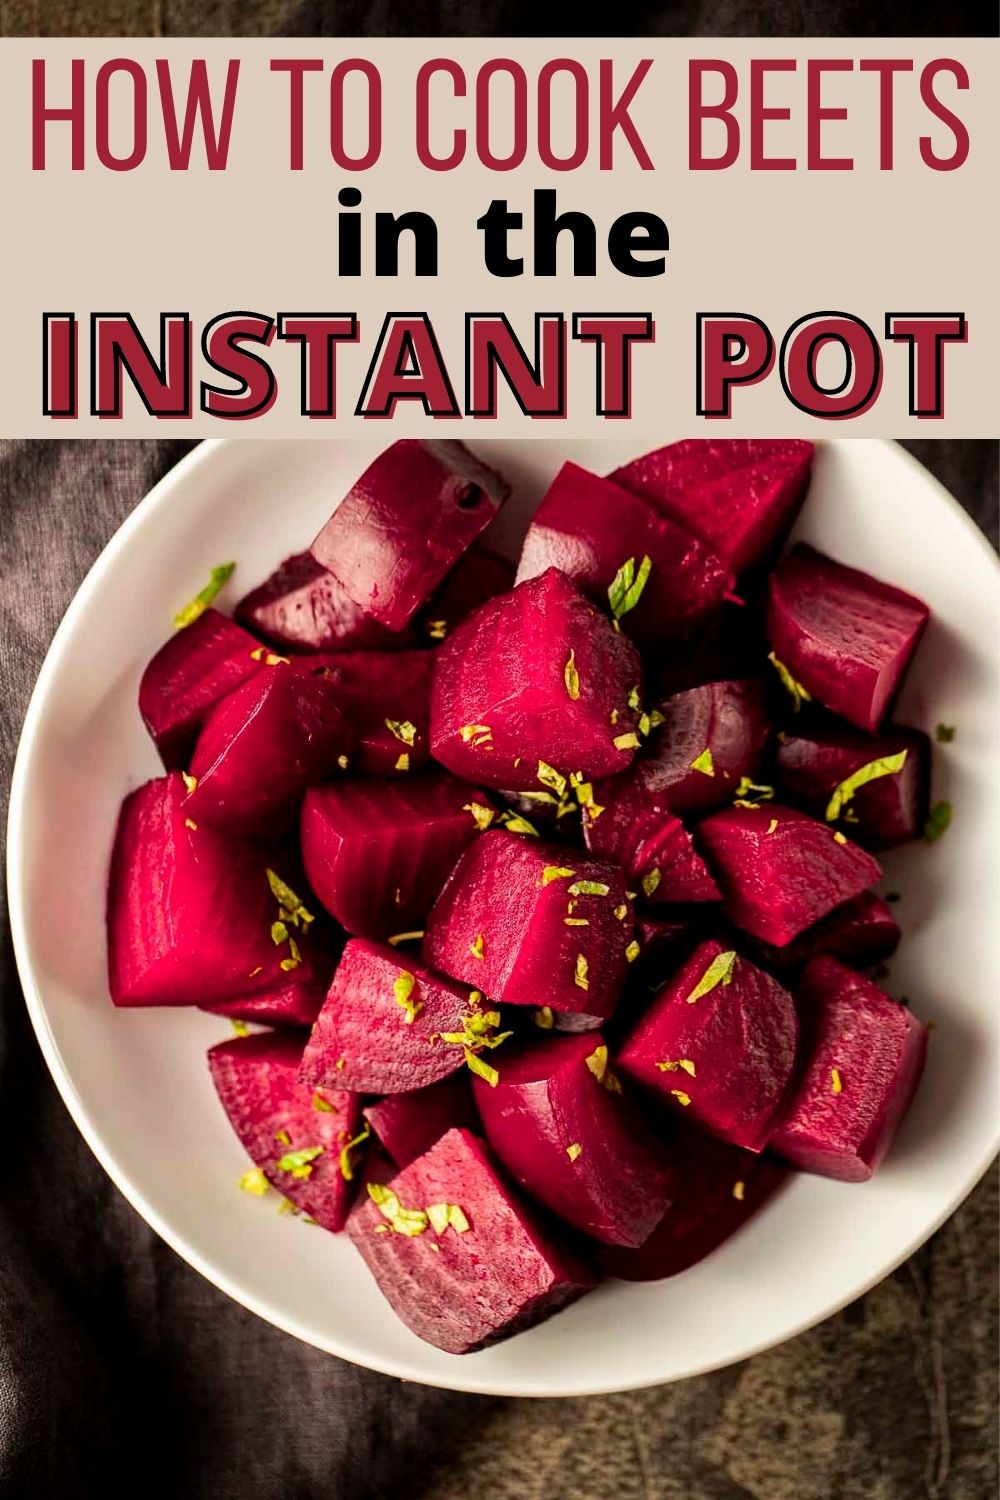 How to Make Instant Pot Beets